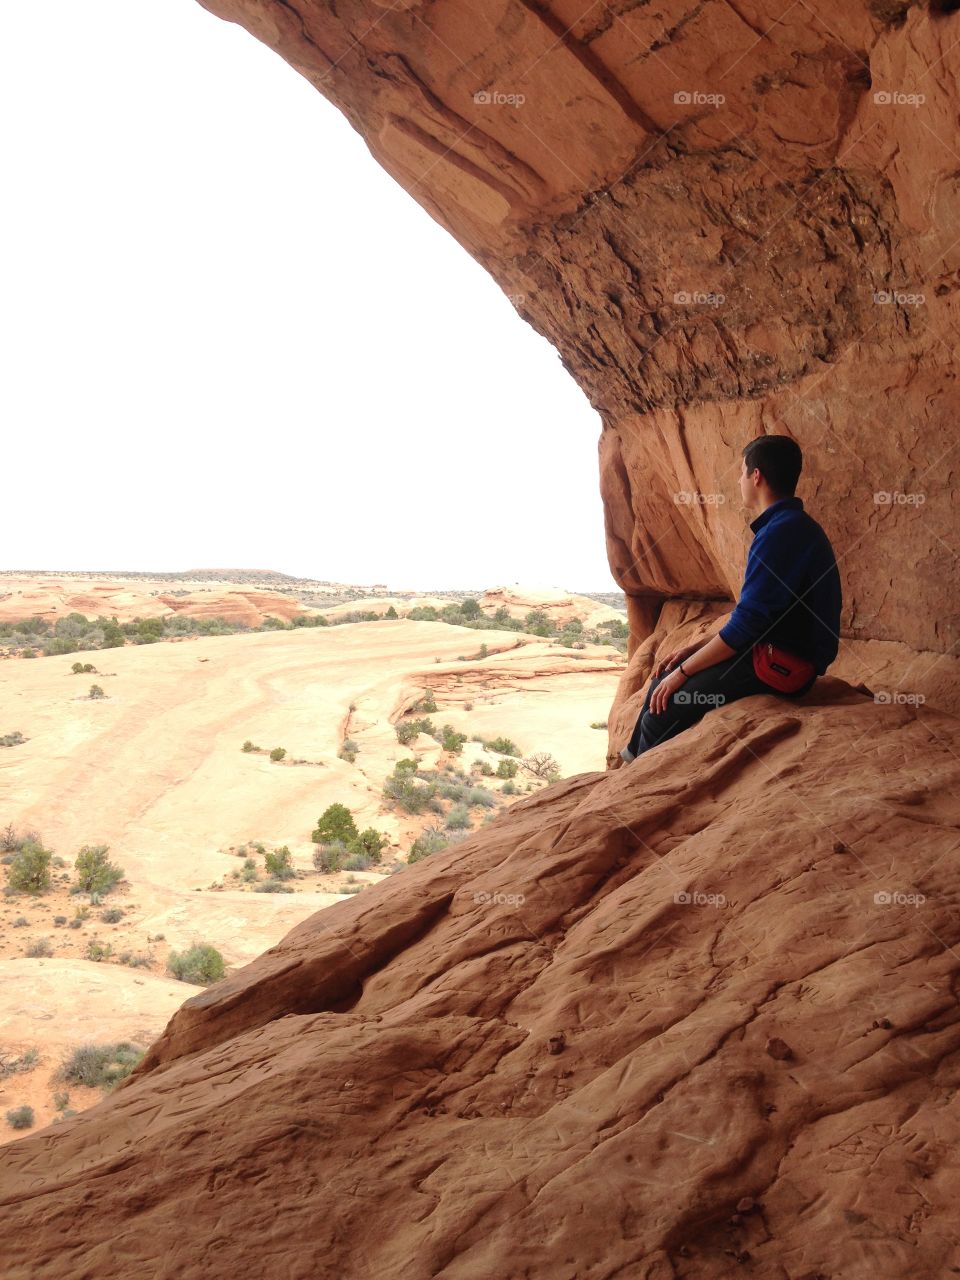 Sitting in the arches cave with an incredible view